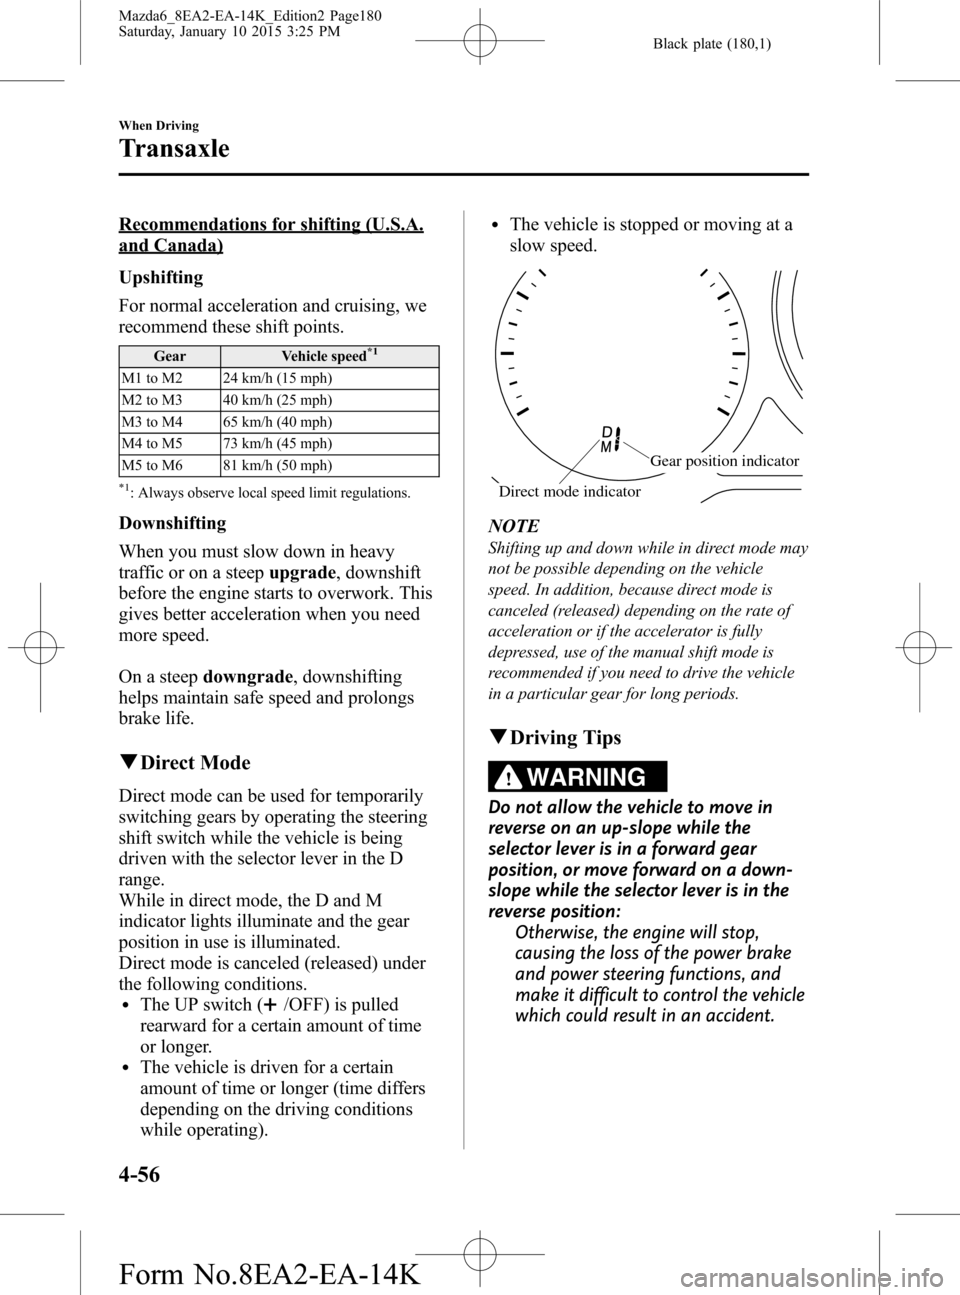 MAZDA MODEL 6 2016  Owners Manual (in English) Black plate (180,1)
Recommendations for shifting (U.S.A.
and Canada)
Upshifting
For normal acceleration and cruising, we
recommend these shift points.
Gear Vehicle speed*1
M1 to M2 24 km/h (15 mph)
M2